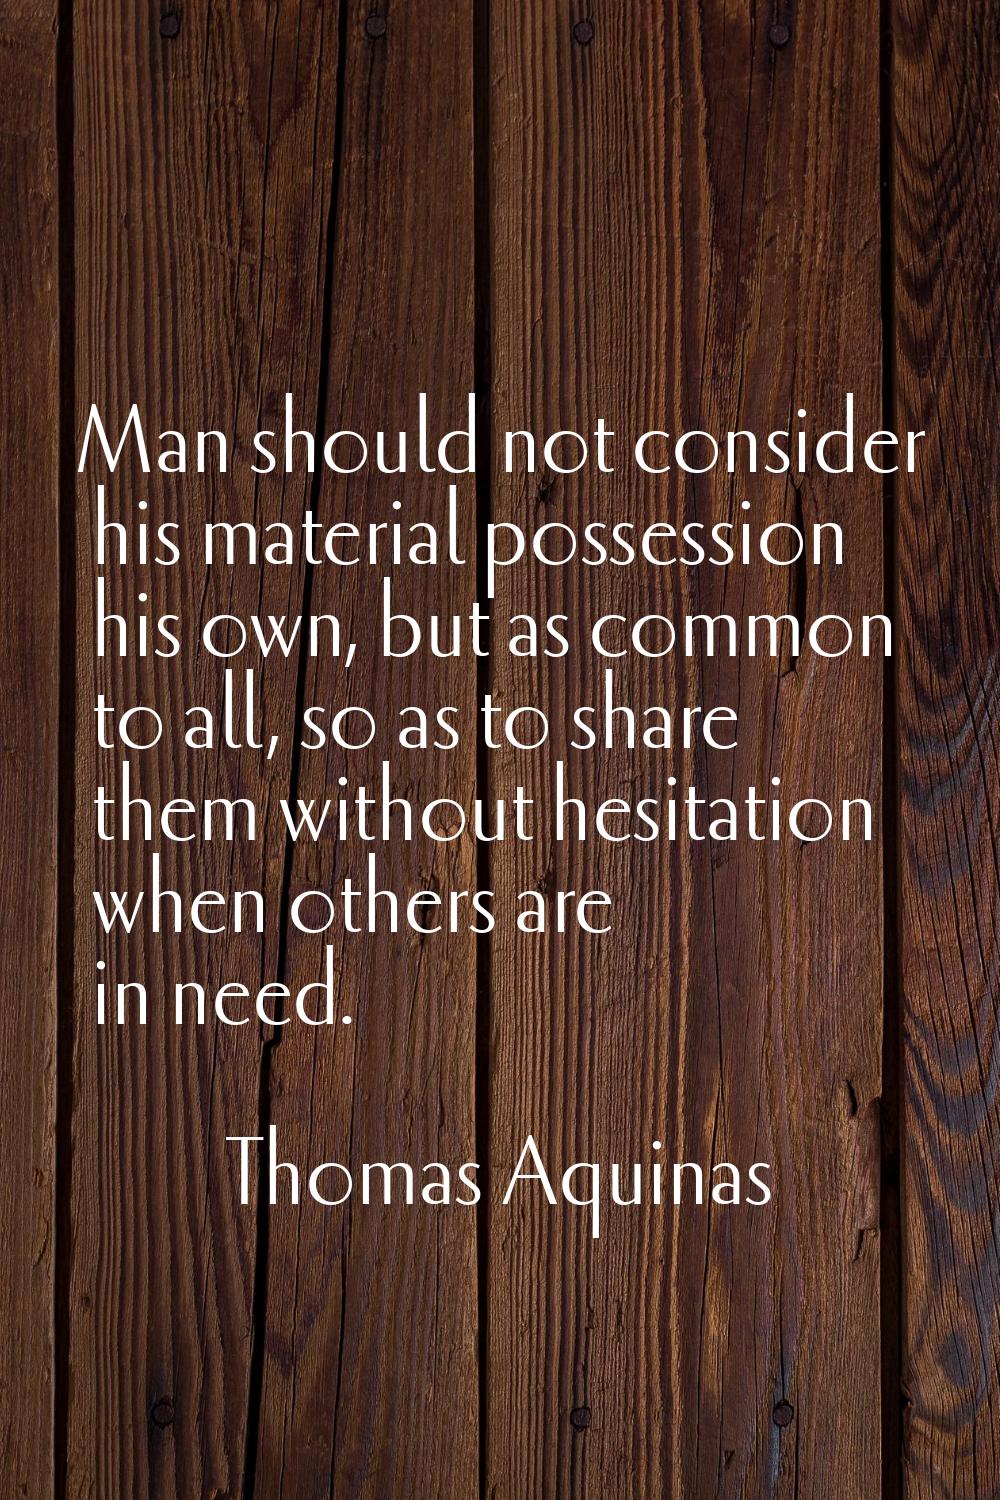 Man should not consider his material possession his own, but as common to all, so as to share them 